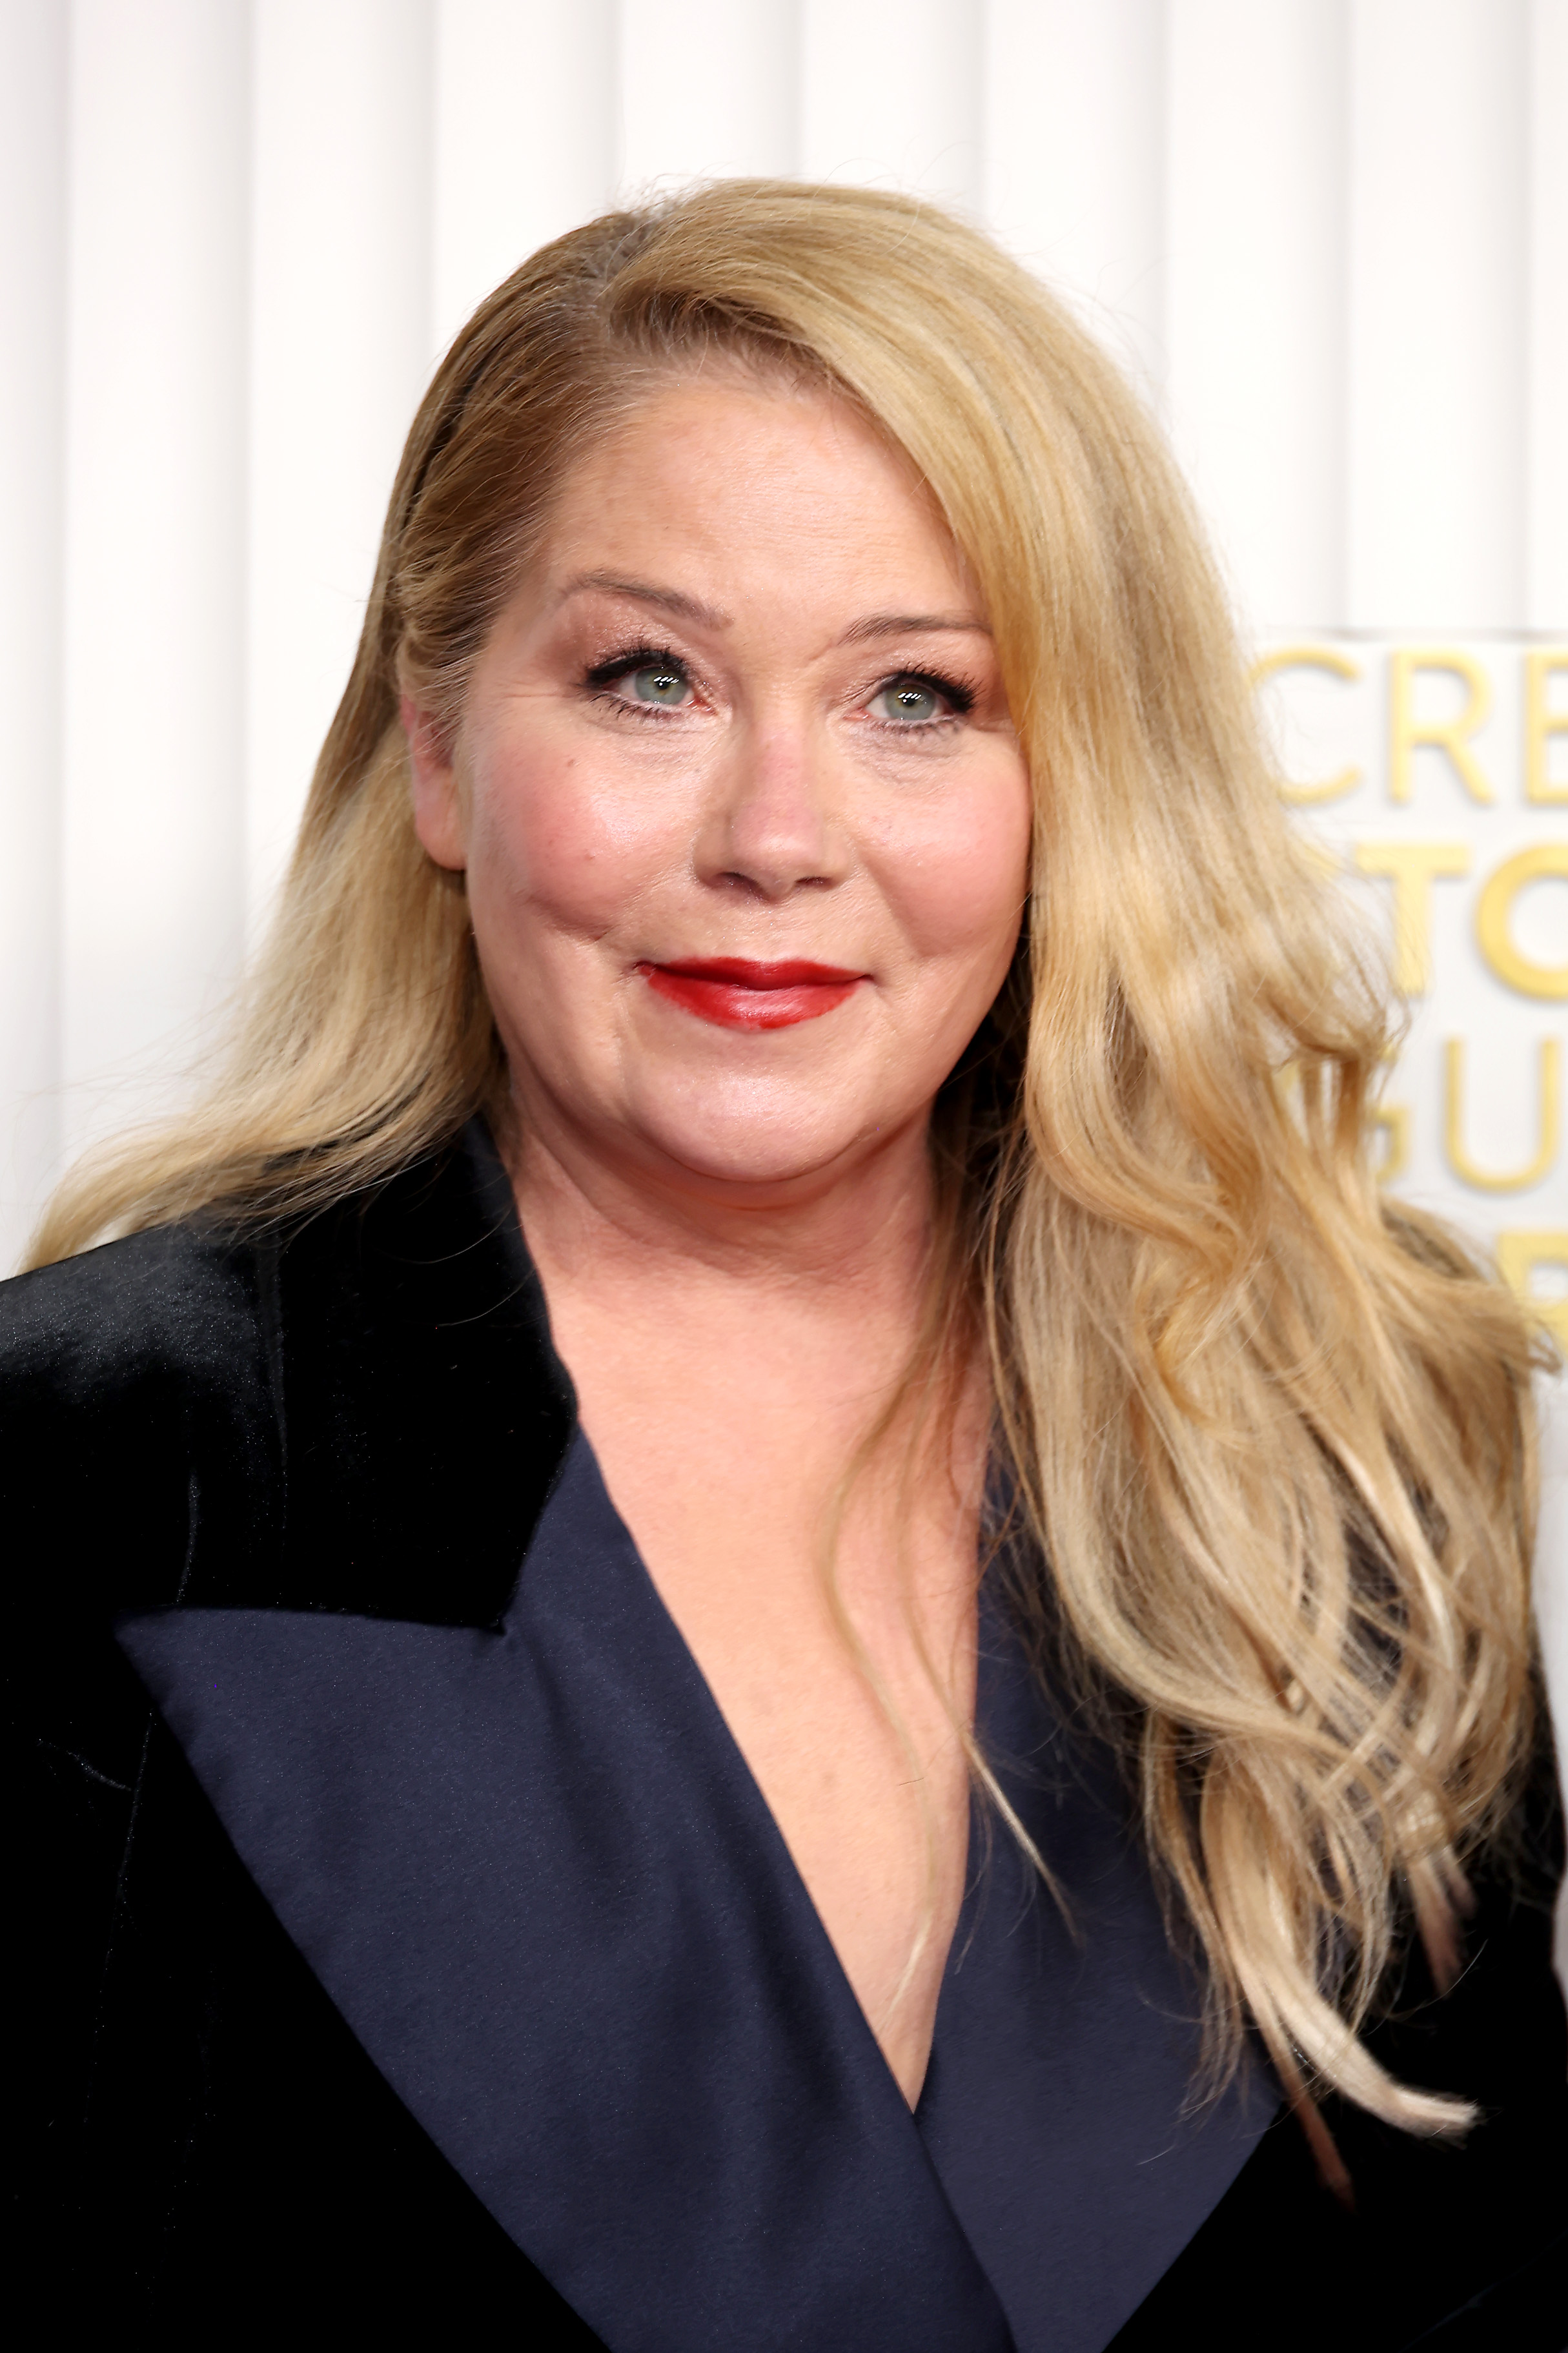 Christina Applegate attends the 29th Annual Screen Actors Guild Awards on February 26, 2023 in Los Angeles, California | Source: Getty Images